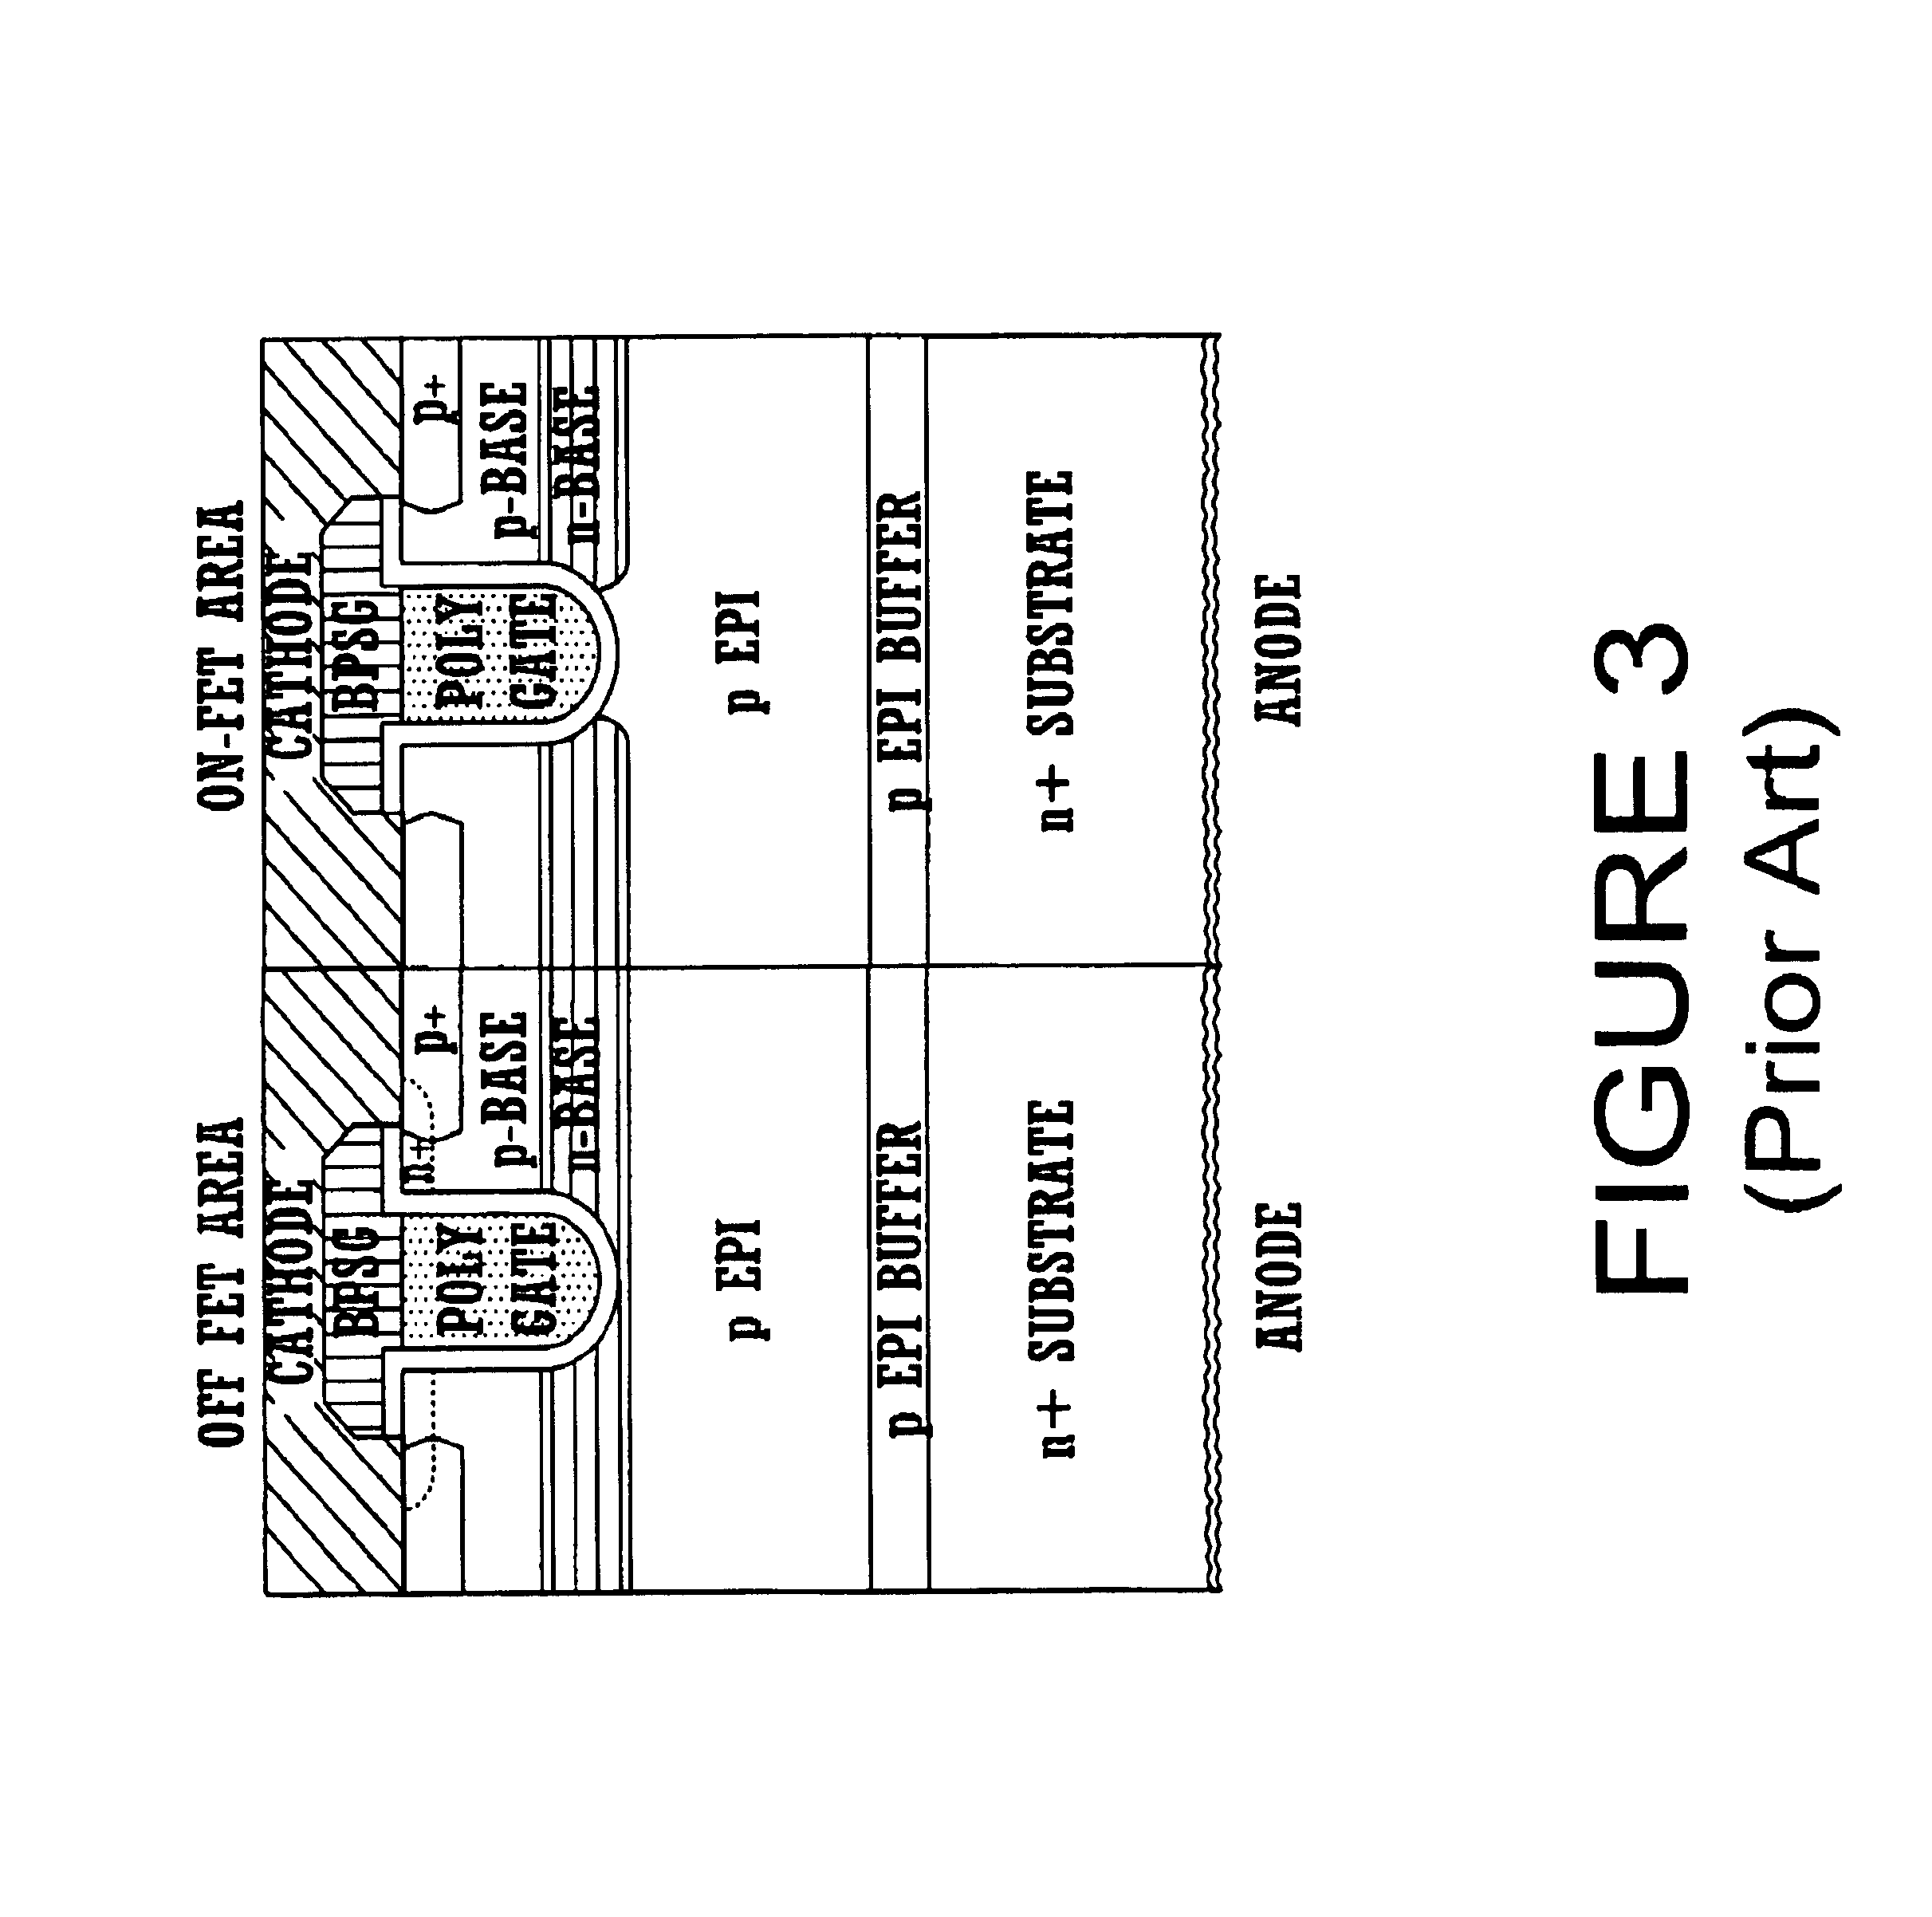 Structures of and methods of fabricating trench-gated MIS devices